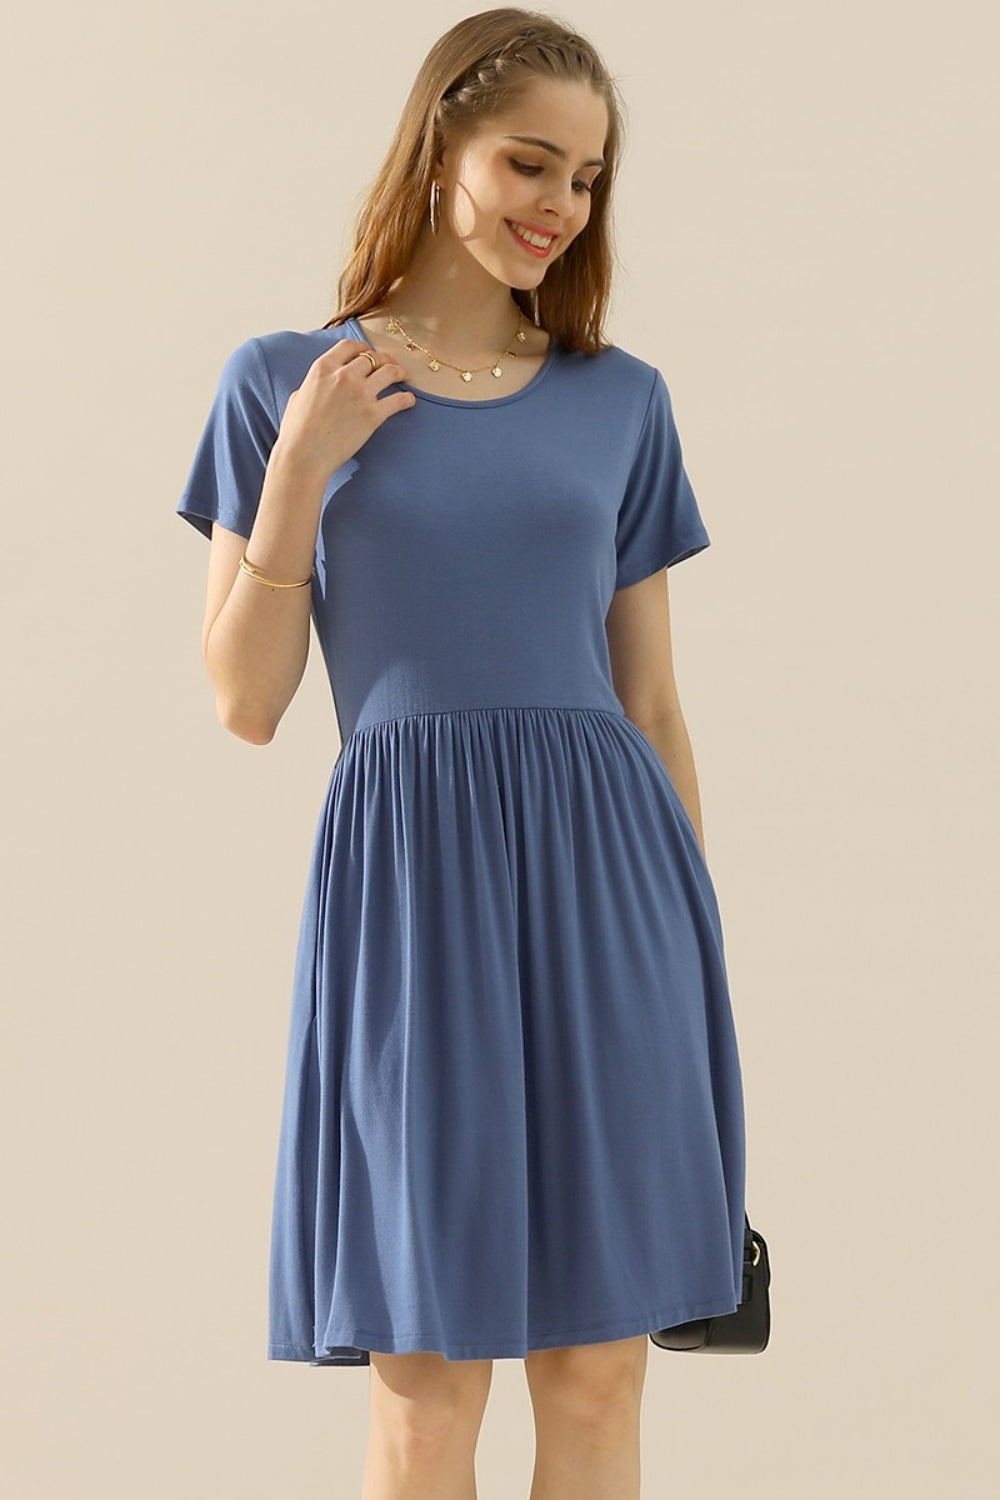 Ninexis Full Size Round Neck Ruched Dress with Pockets - DENIMBLUE / S - DRESSES - Mixed